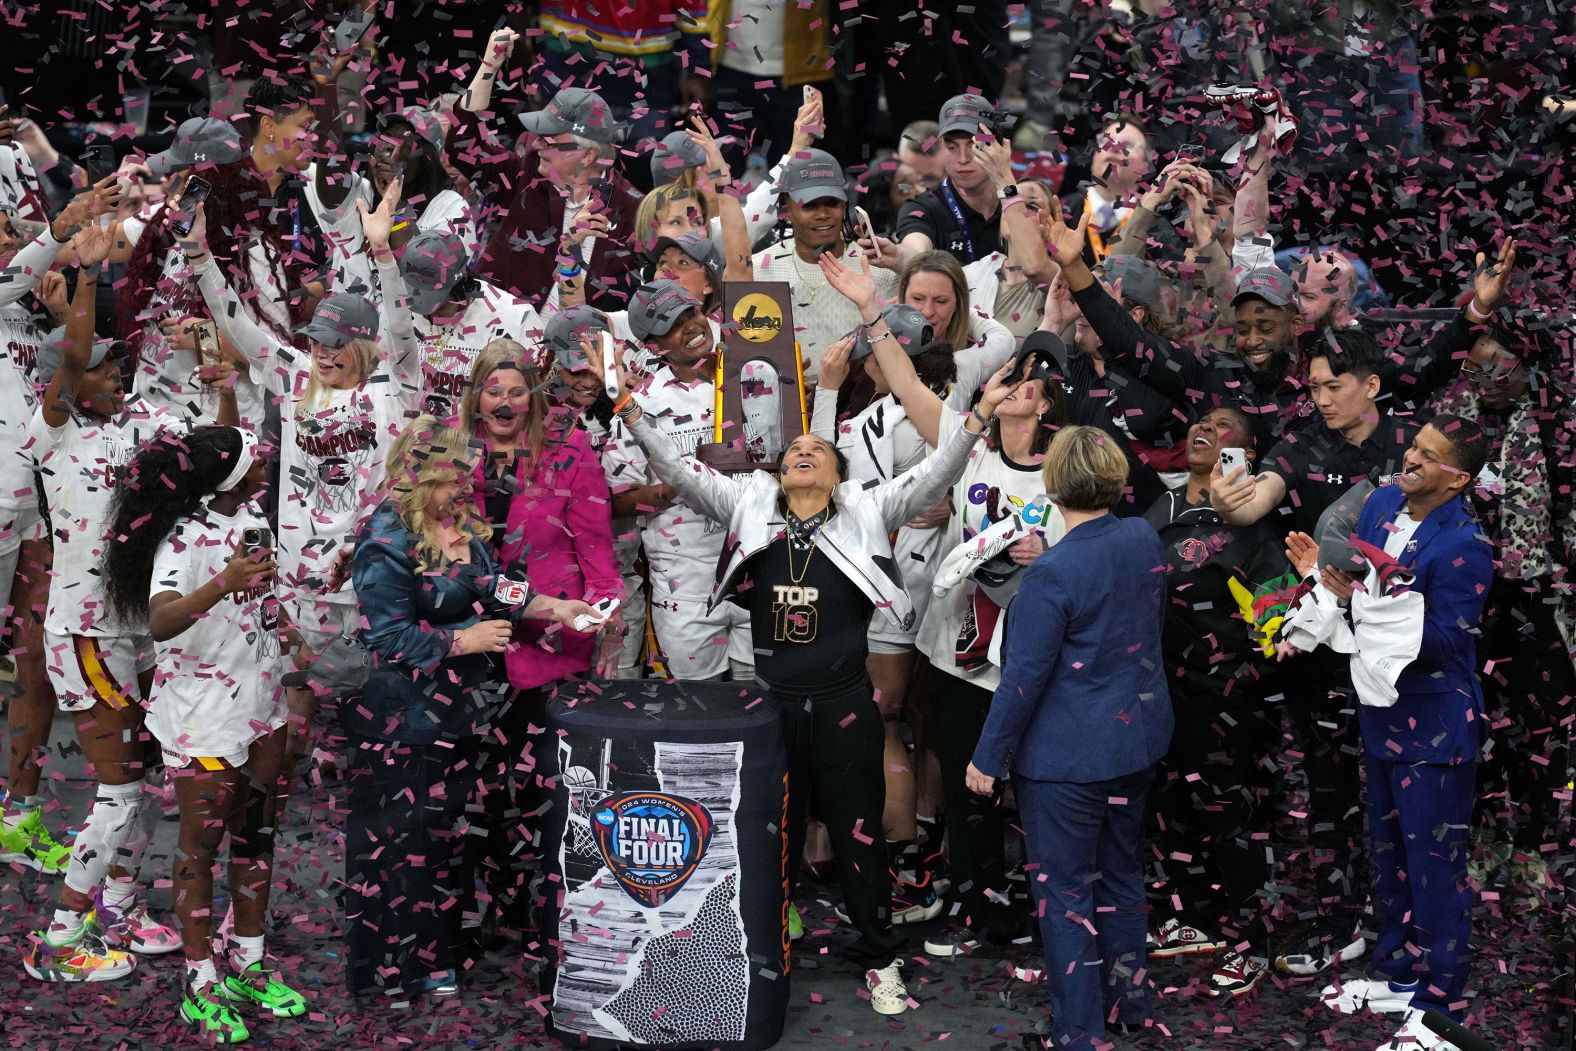 Head coach Dawn Staley, center, and the South Carolina Gamecocks celebrate after beating the Iowa Hawkeyes in the <a href="index.php?page=&url=https%3A%2F%2Fwww.cnn.com%2F2024%2F04%2F06%2Fsport%2Fgallery%2Fncaa-womens-final-four-2024%2Findex.html" target="_blank">NCAA women's basketball national championship</a> in Cleveland on Sunday, April 7. The No. 1 overall seed <a href="index.php?page=&url=https%3A%2F%2Fwww.cnn.com%2F2024%2F04%2F07%2Fsport%2Fiowa-south-carolina-final-caitlin-clark-spt-intl%2Findex.html" target="_blank">defeated Iowa</a> 87-75 to win the school's third championship, completing a perfect 38-0 season.